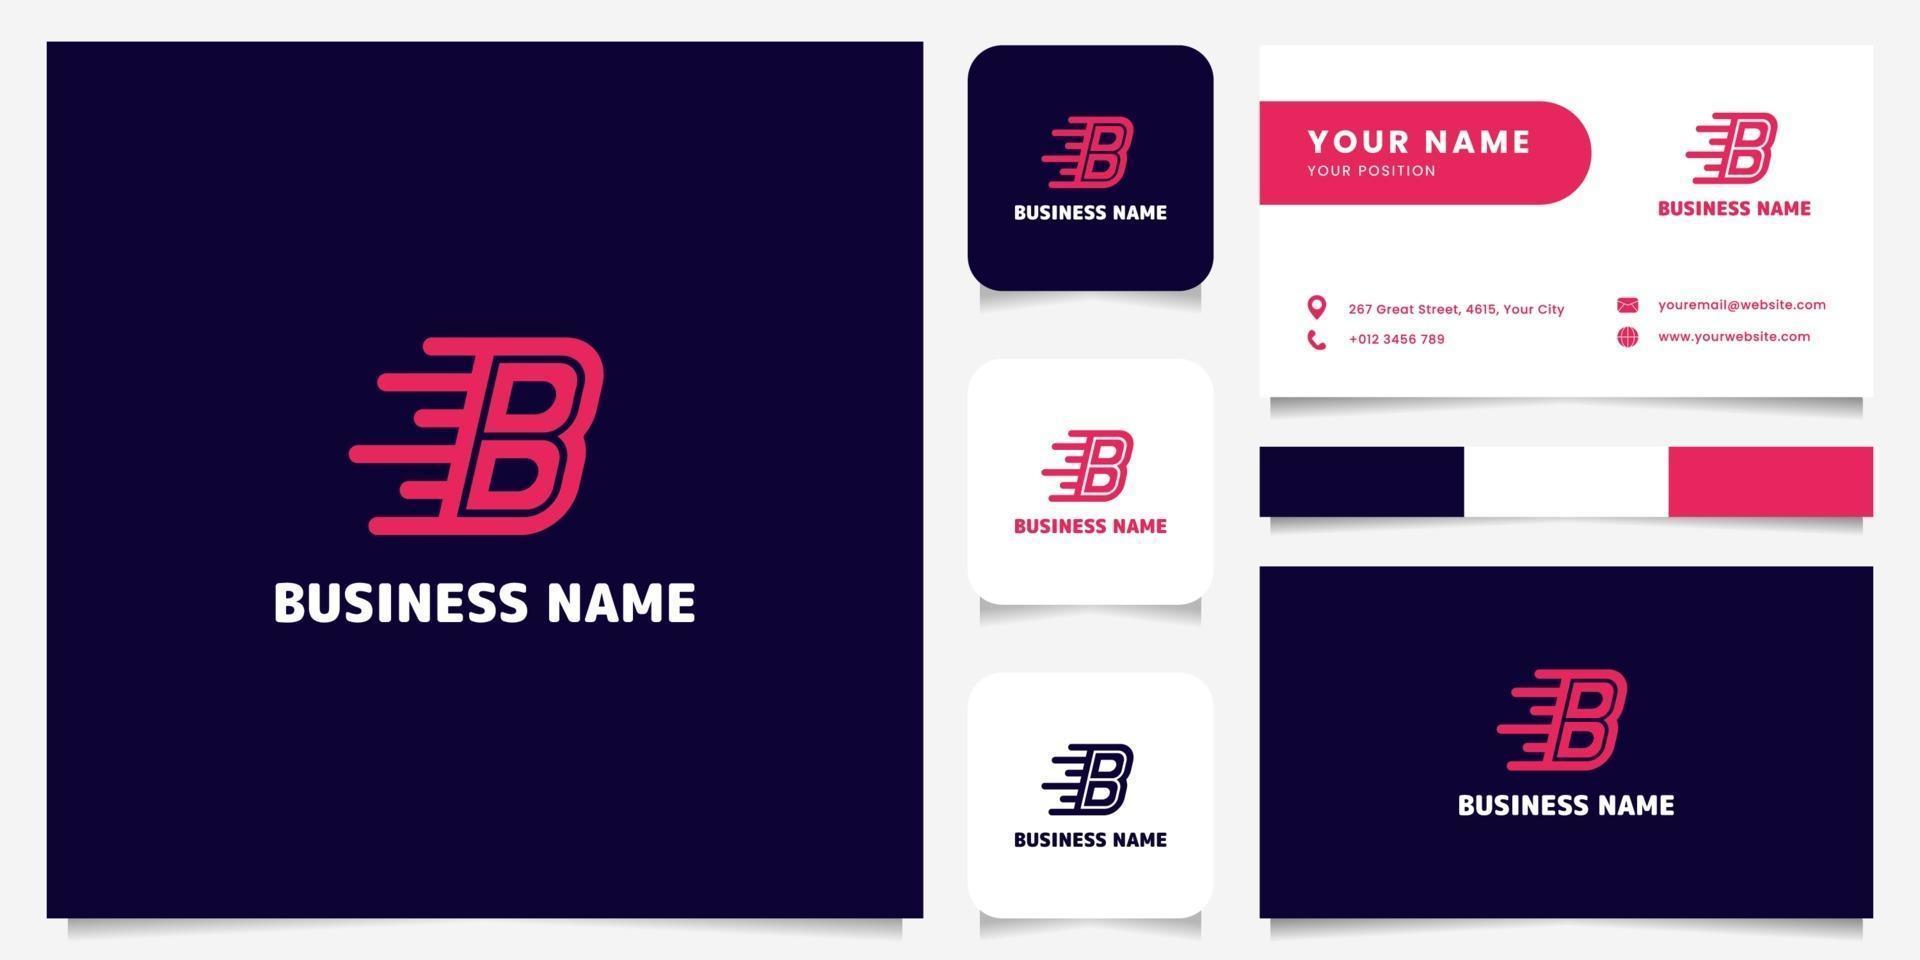 Simple and Minimalist Bright Pink Letter B Speed Logo in Dark Background Logo with Business Card Template vector